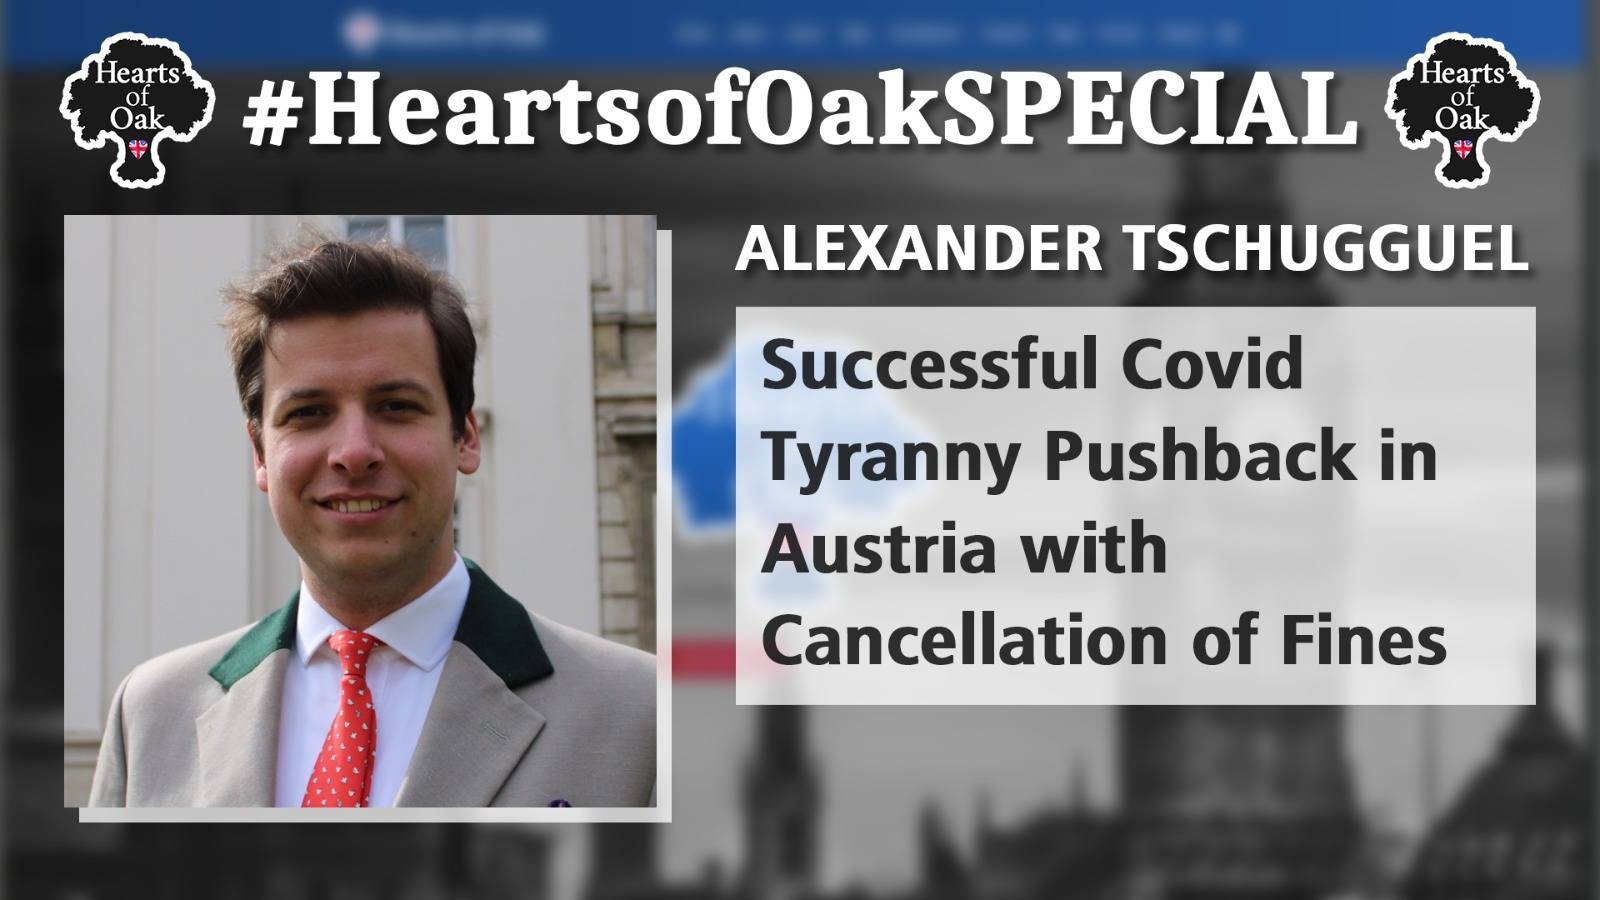 Alexander Tschugguel - Successful Covid Tyranny Pushback in Austria with Cancellation of Fines